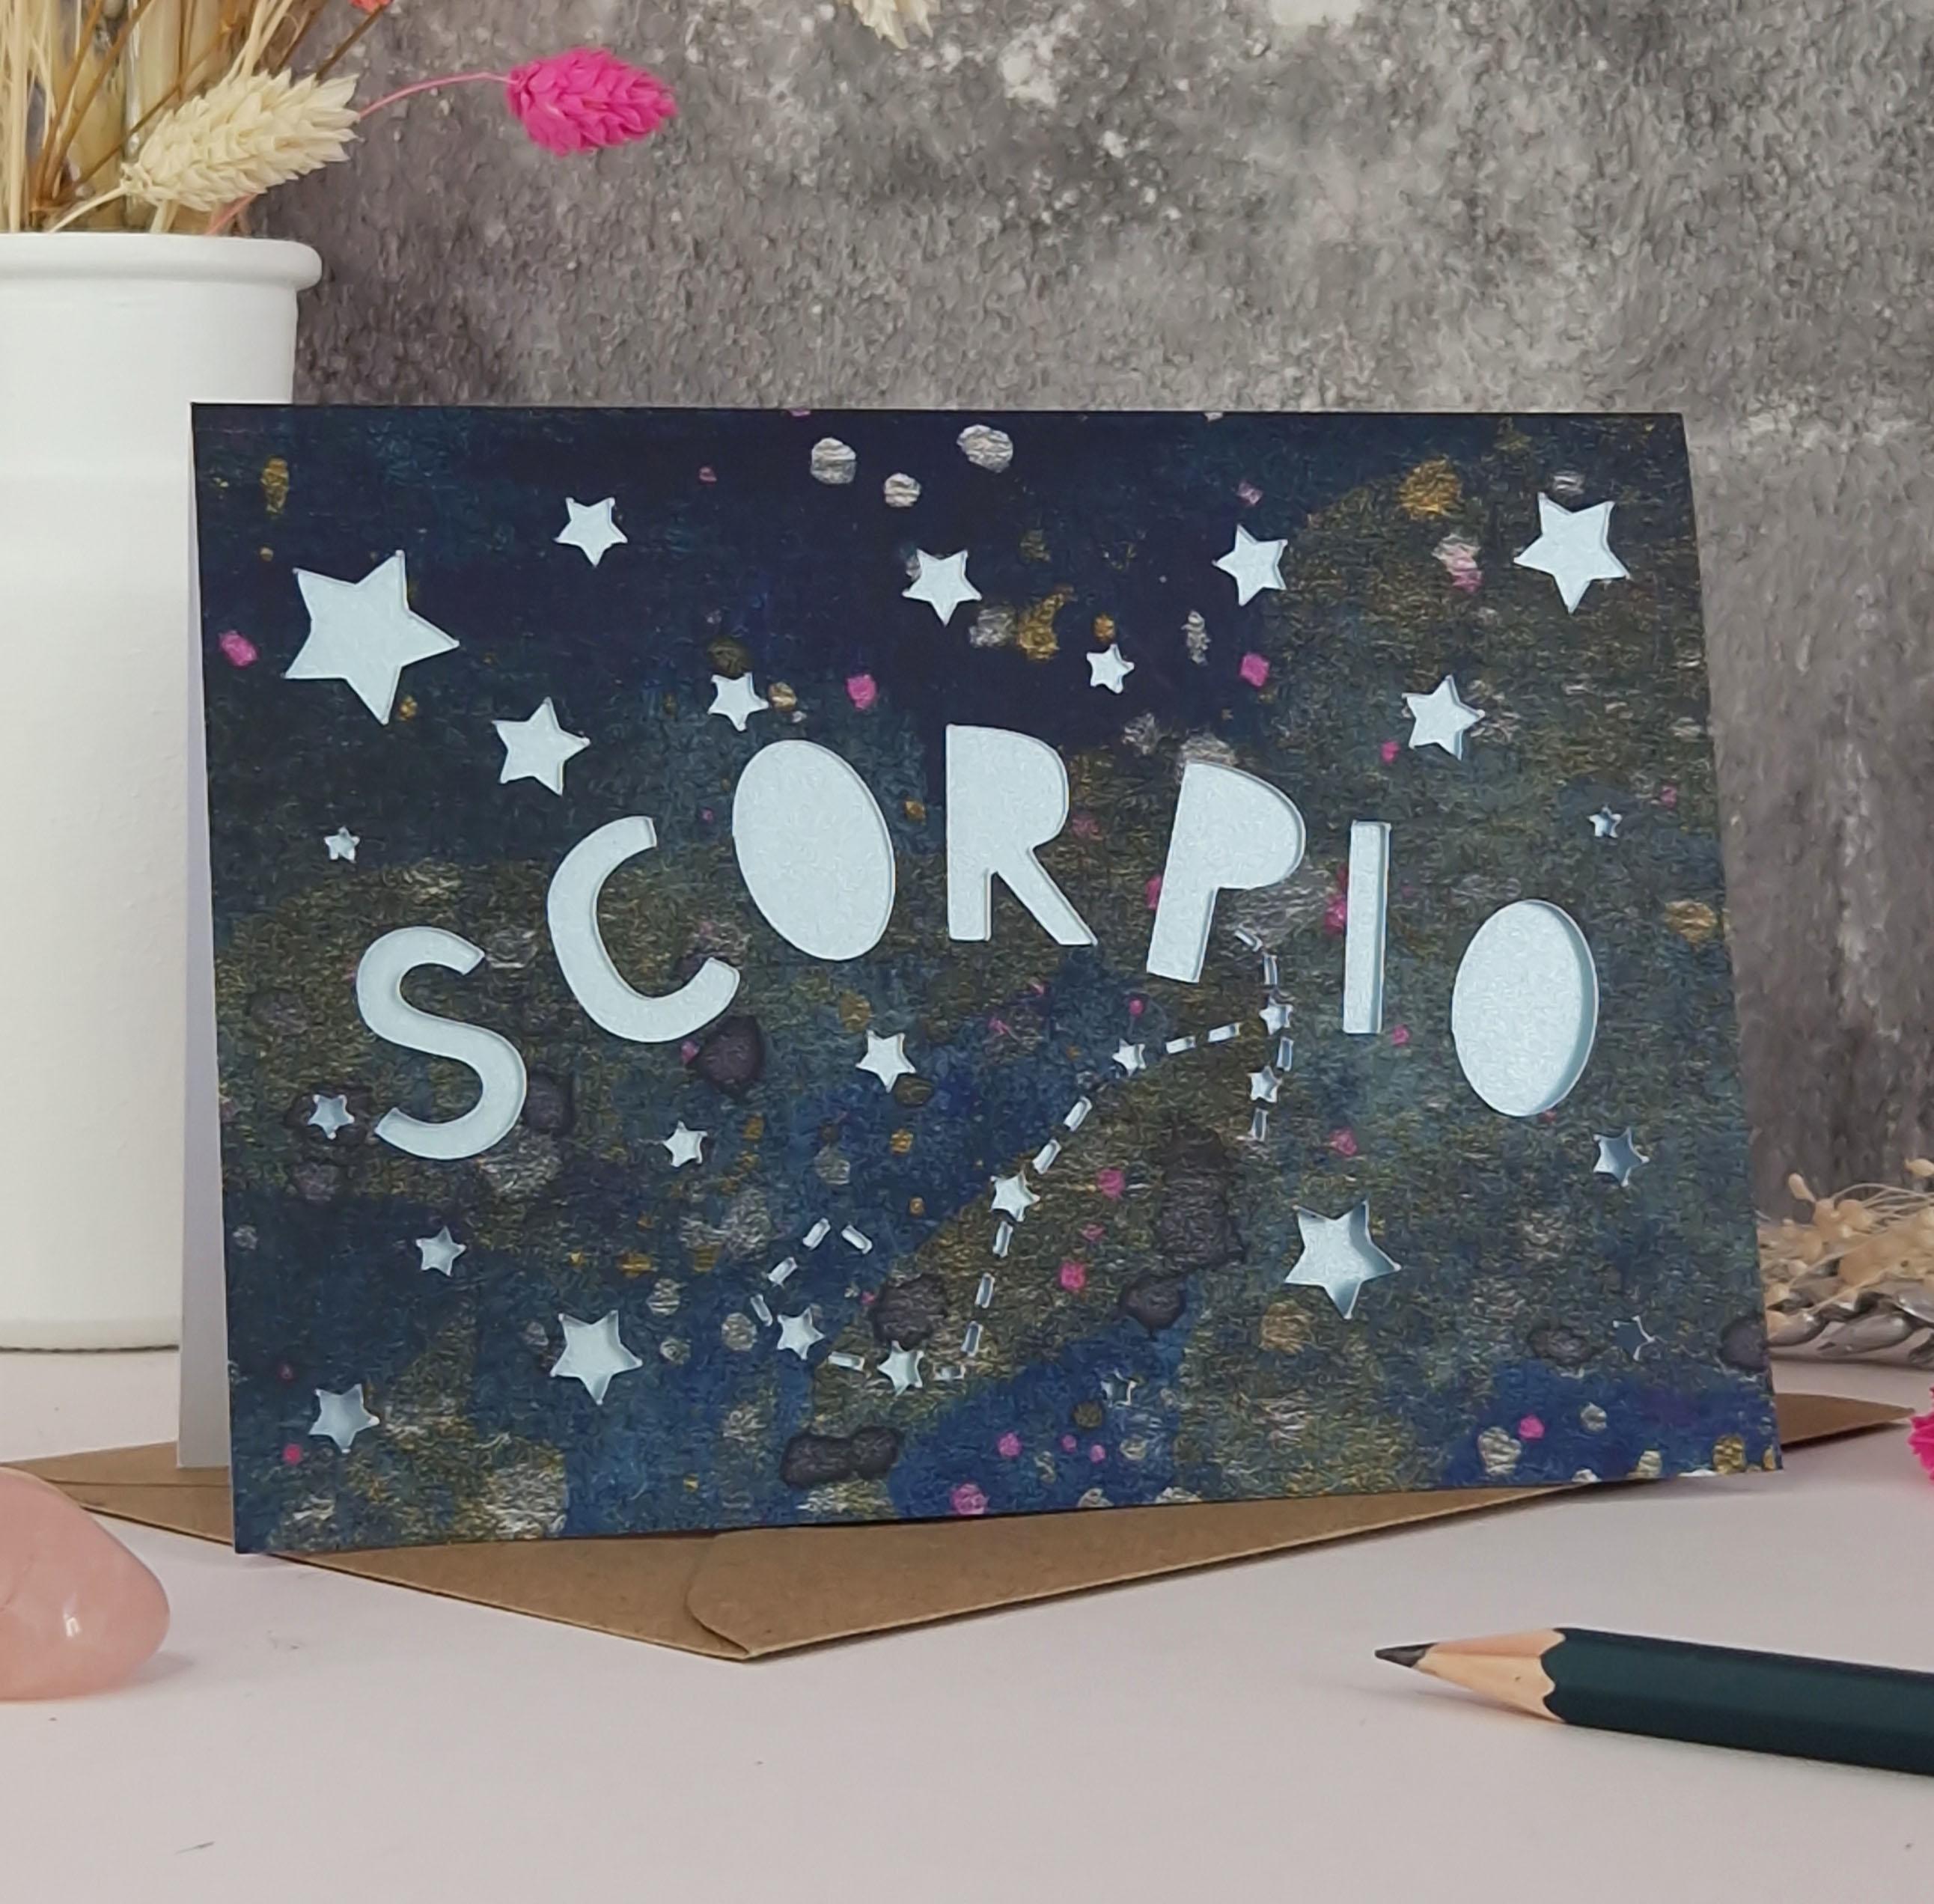 Midnight Blue printed card with papercut text that says 'Scorpio' and a light blue pearl liner